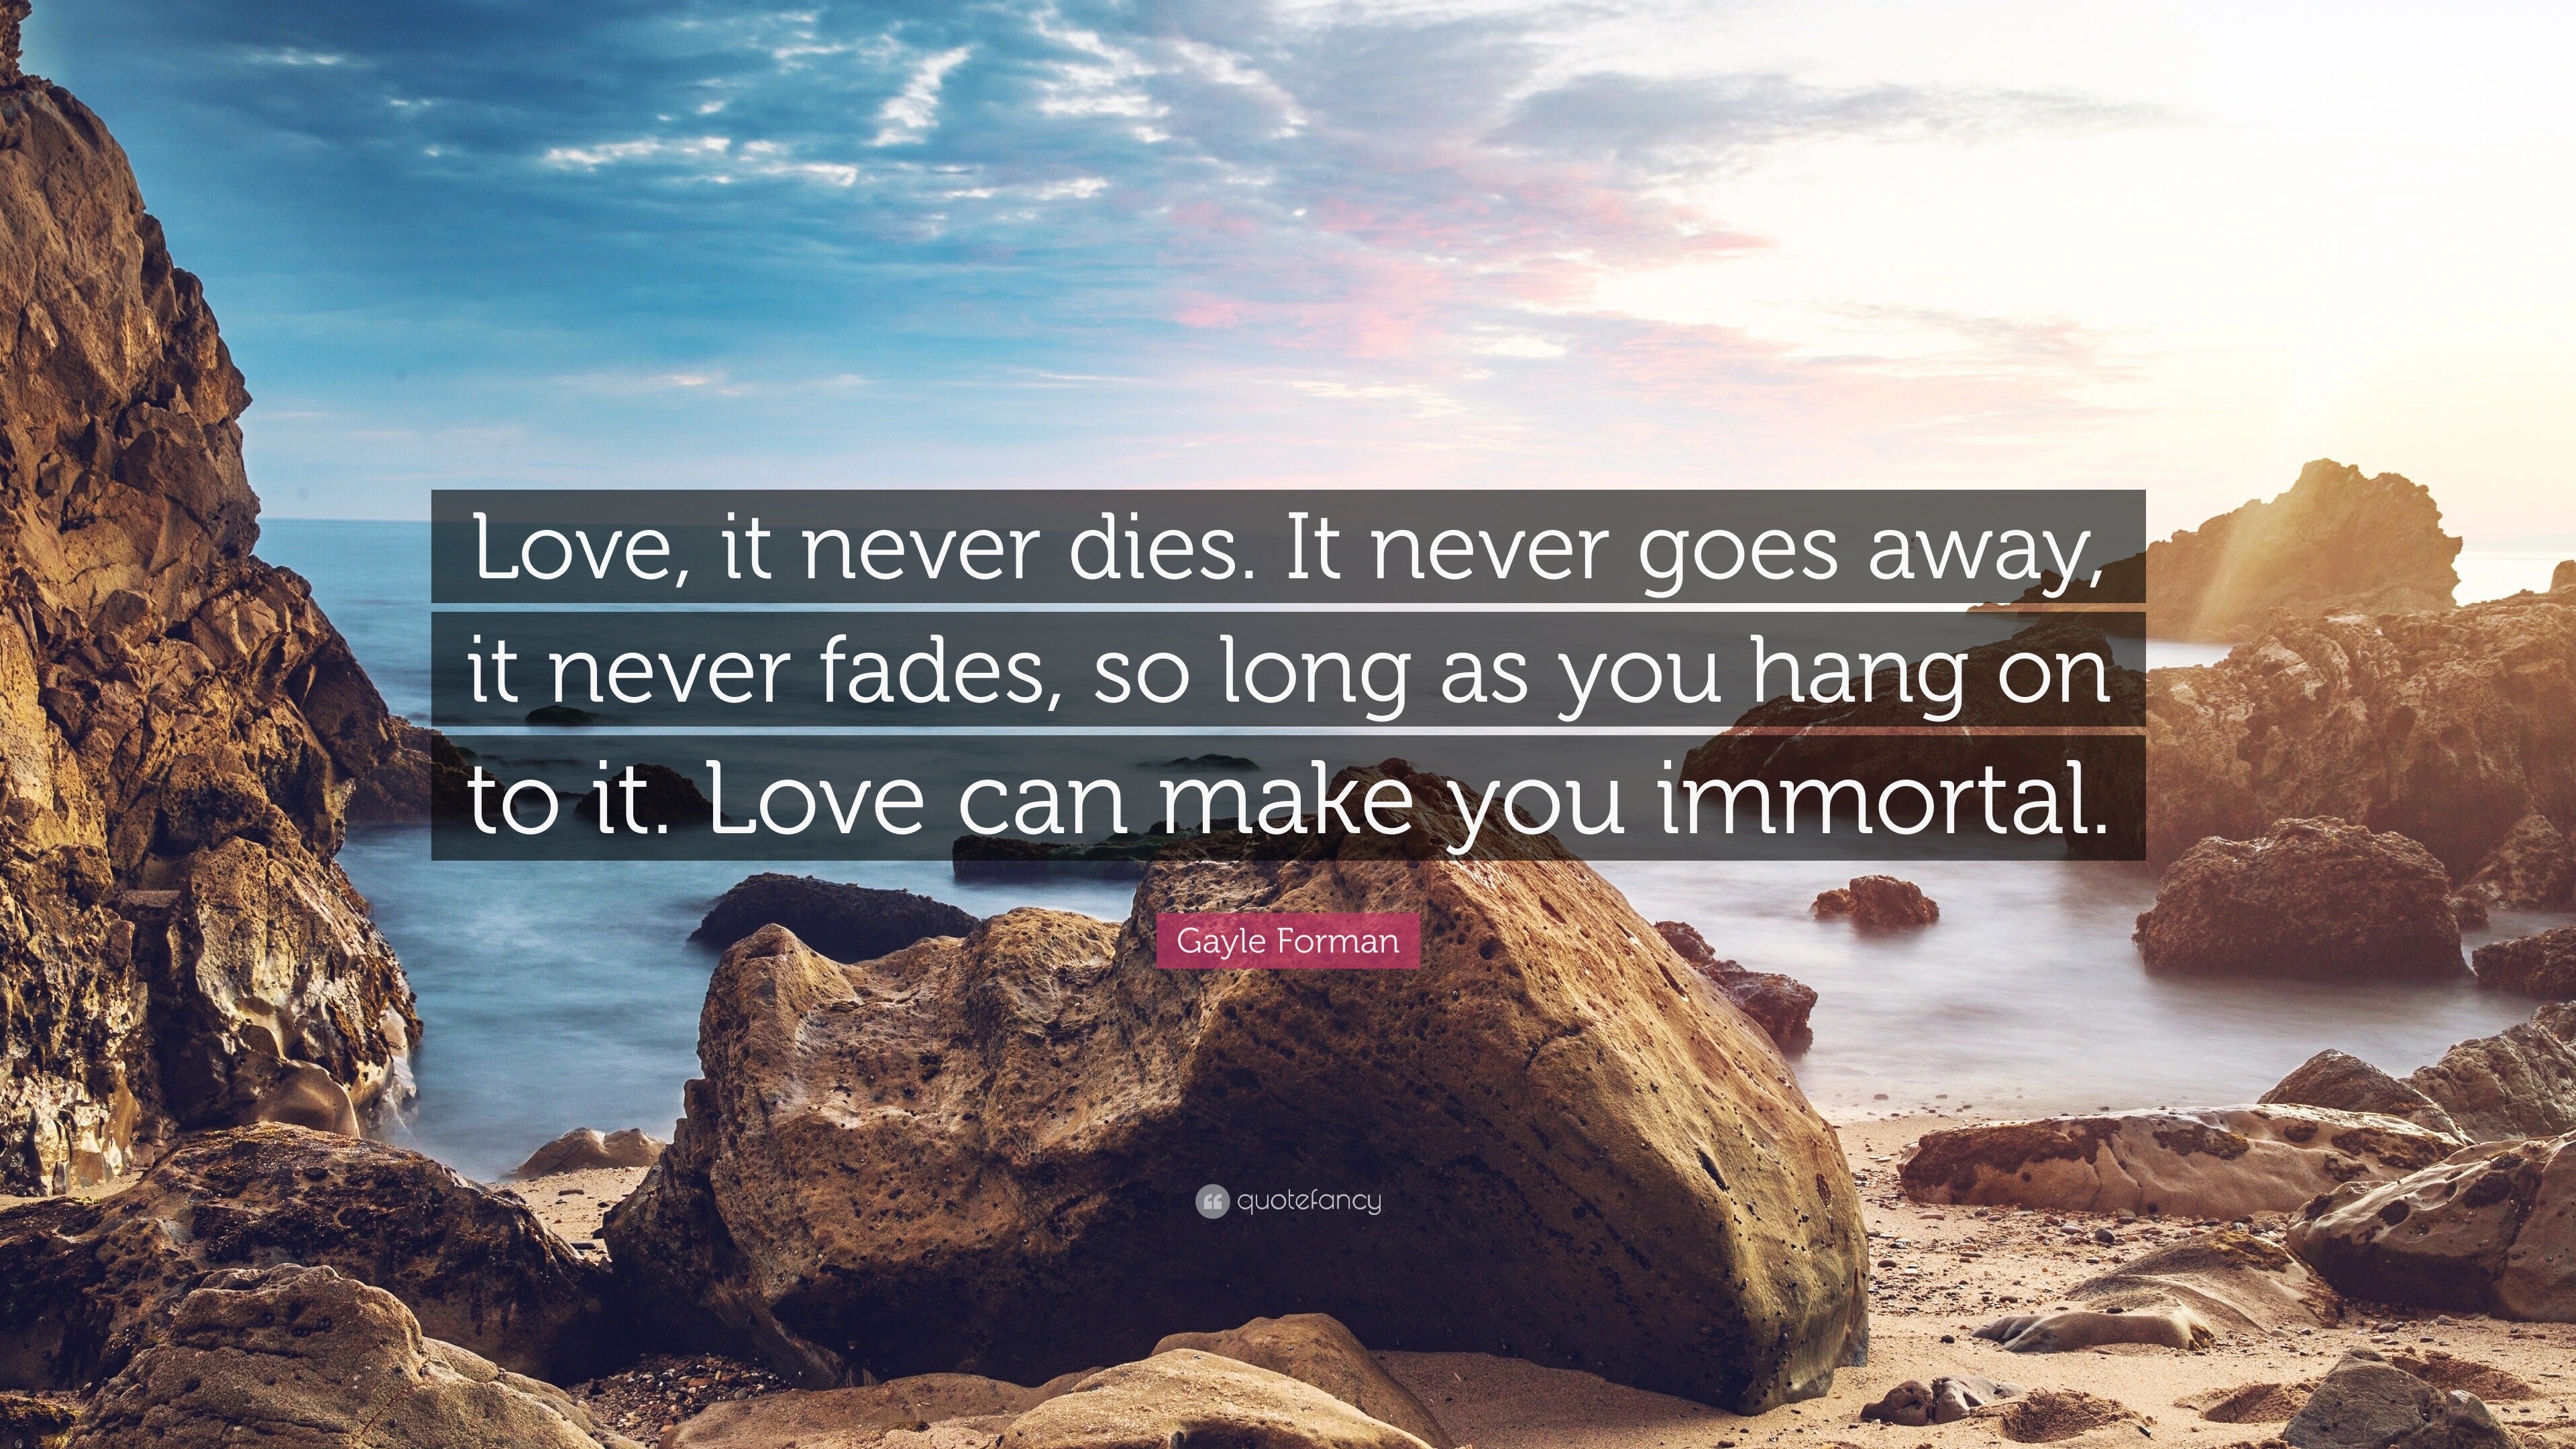 Gayle Forman Quote “Love it never s It never goes away